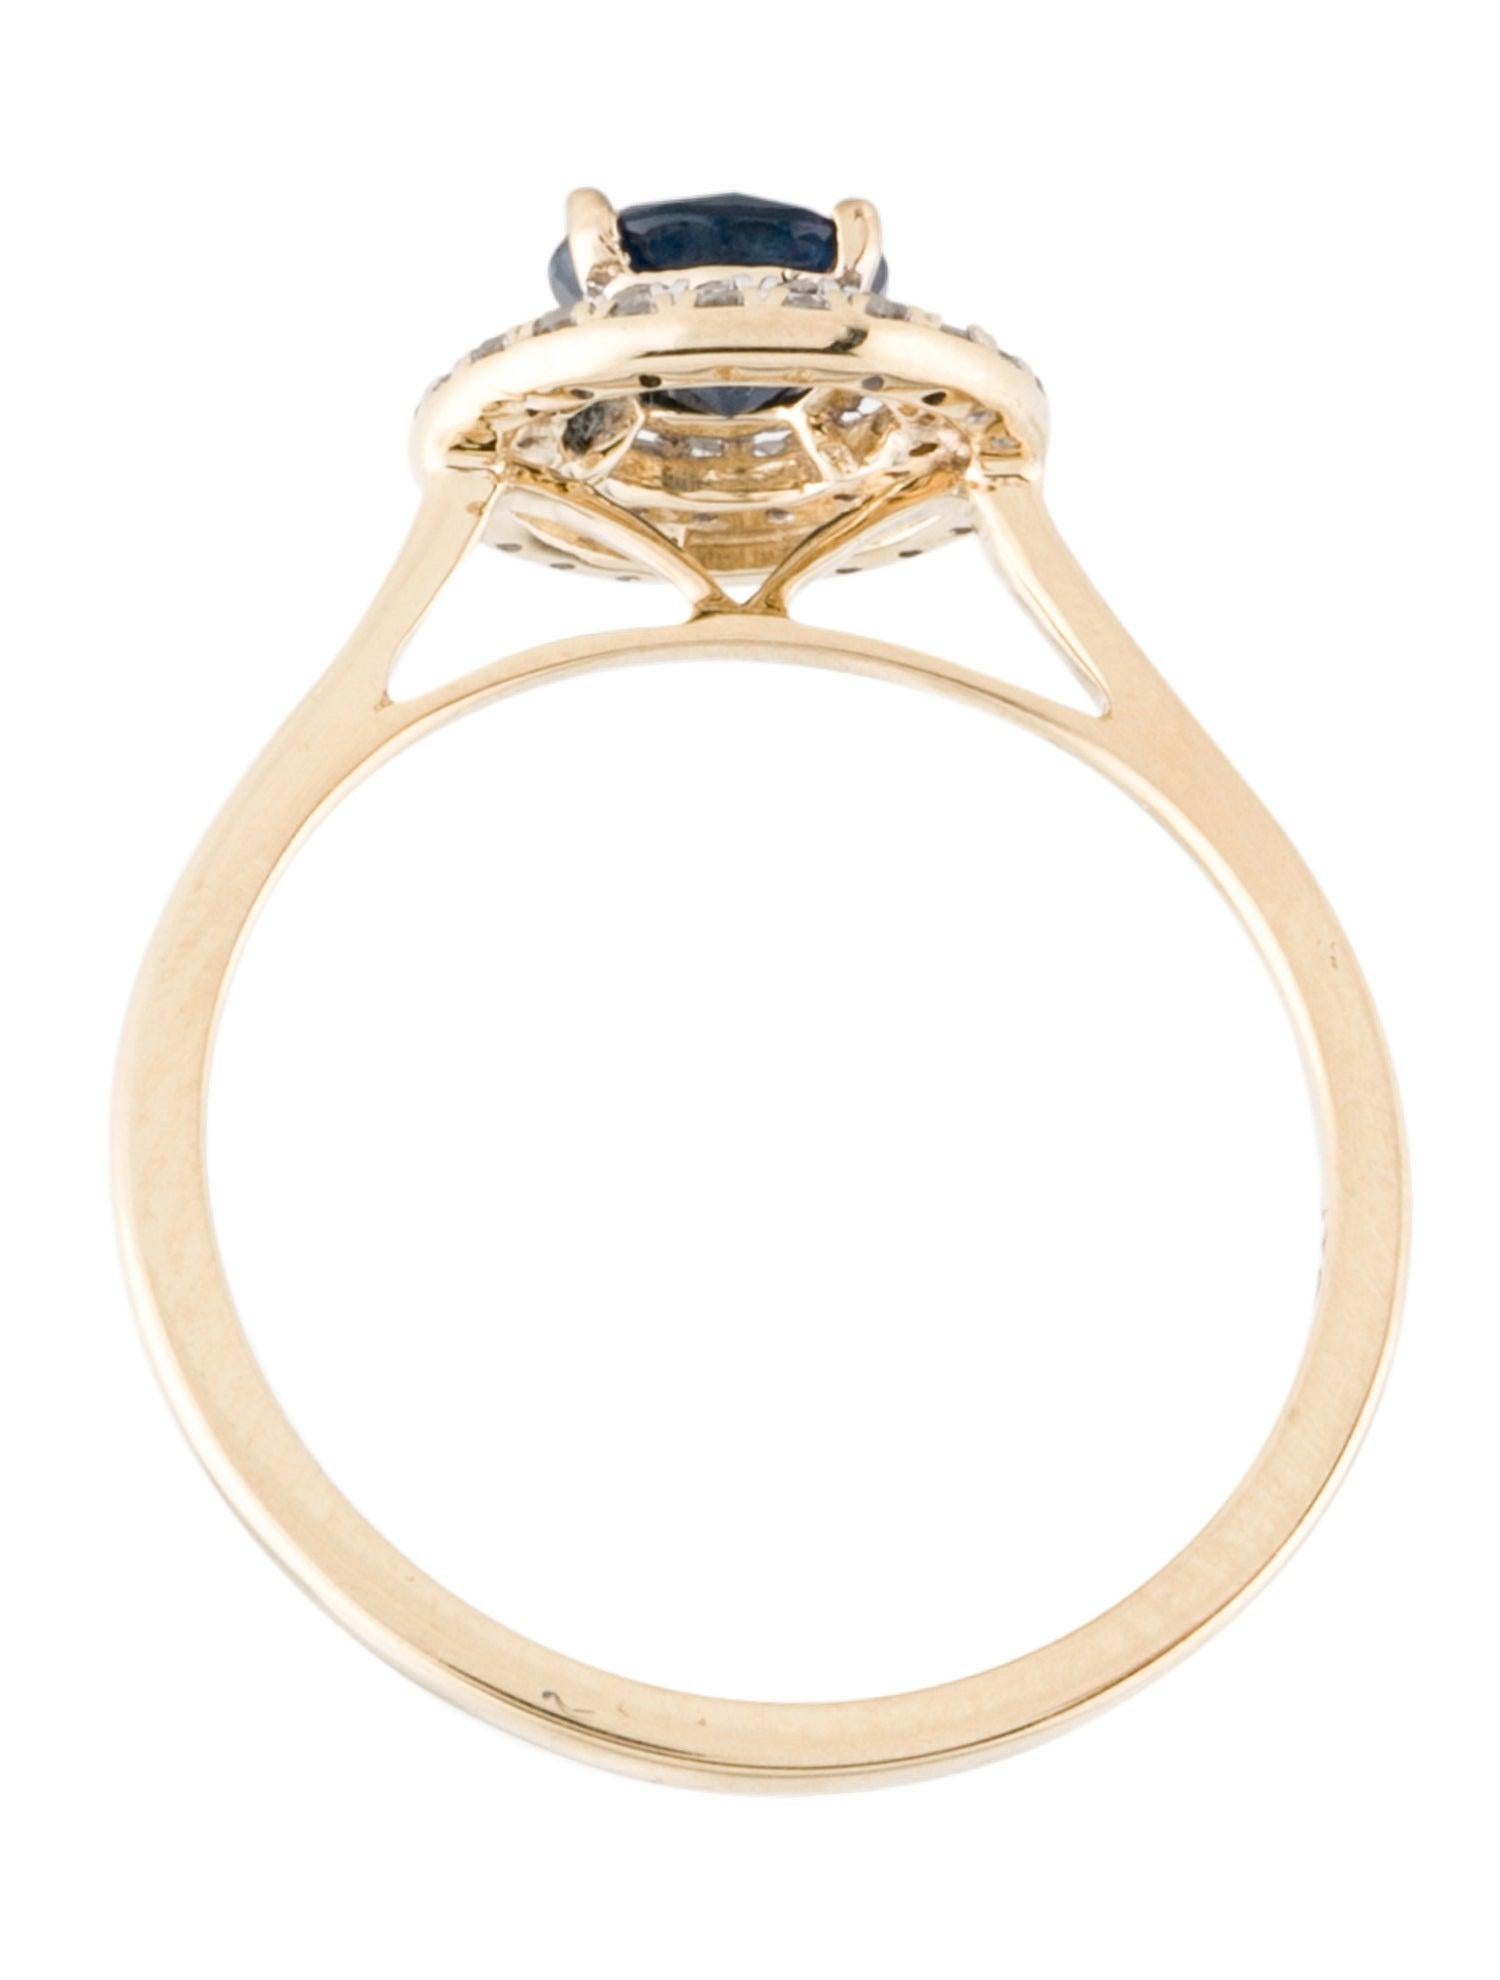 Luxurious 14K Sapphire & Diamond Cocktail Ring - Size 6.5 Vintage Gemstone Rin In New Condition For Sale In Holtsville, NY